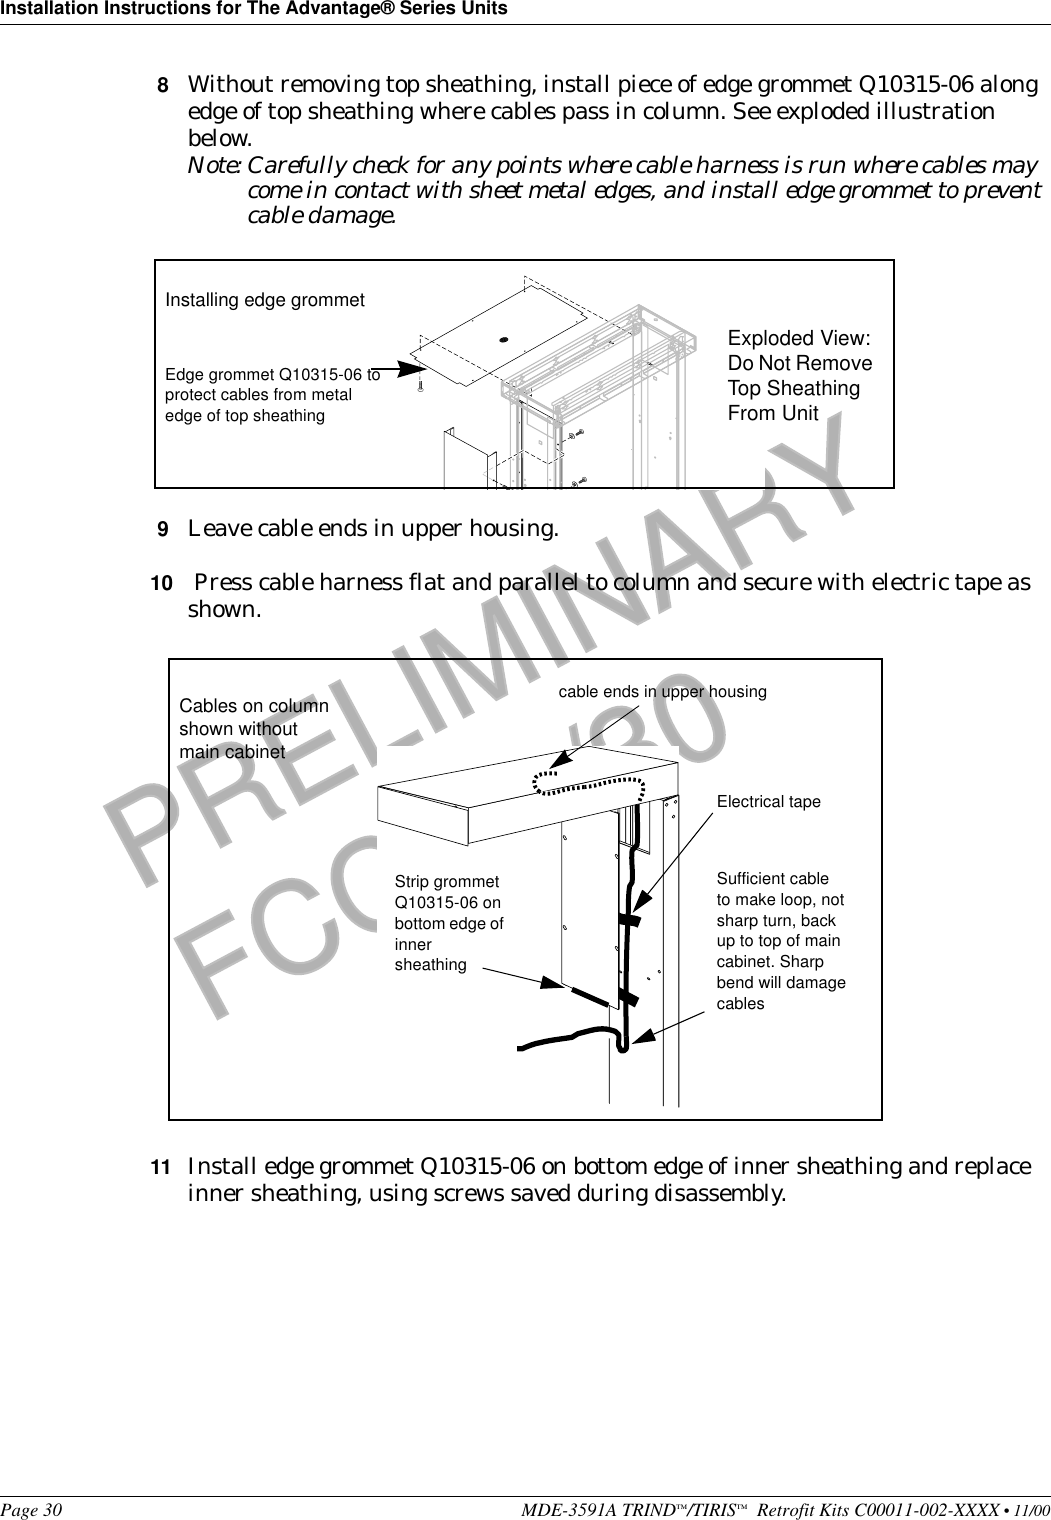 Installation Instructions for The Advantage® Series UnitsPage 30 MDE-3591A TRIND™/TIRIS™  Retrofit Kits C00011-002-XXXX • 11/00PRELIMINARYFCC 11/308Without removing top sheathing, install piece of edge grommet Q10315-06 along edge of top sheathing where cables pass in column. See exploded illustration below.Note: Carefully check for any points where cable harness is run where cables may come in contact with sheet metal edges, and install edge grommet to prevent cable damage. 9Leave cable ends in upper housing.10  Press cable harness flat and parallel to column and secure with electric tape as shown.11 Install edge grommet Q10315-06 on bottom edge of inner sheathing and replace inner sheathing, using screws saved during disassembly.Edge grommet Q10315-06 to protect cables from metal edge of top sheathingInstalling edge grommetExploded View: Do Not Remove Top Sheathing From UnitElectrical tapeSufficient cable to make loop, not sharp turn, back up to top of main cabinet. Sharp bend will damage cablesStrip grommet Q10315-06 on bottom edge of inner sheathingCables on column shown without main cabinetcable ends in upper housing